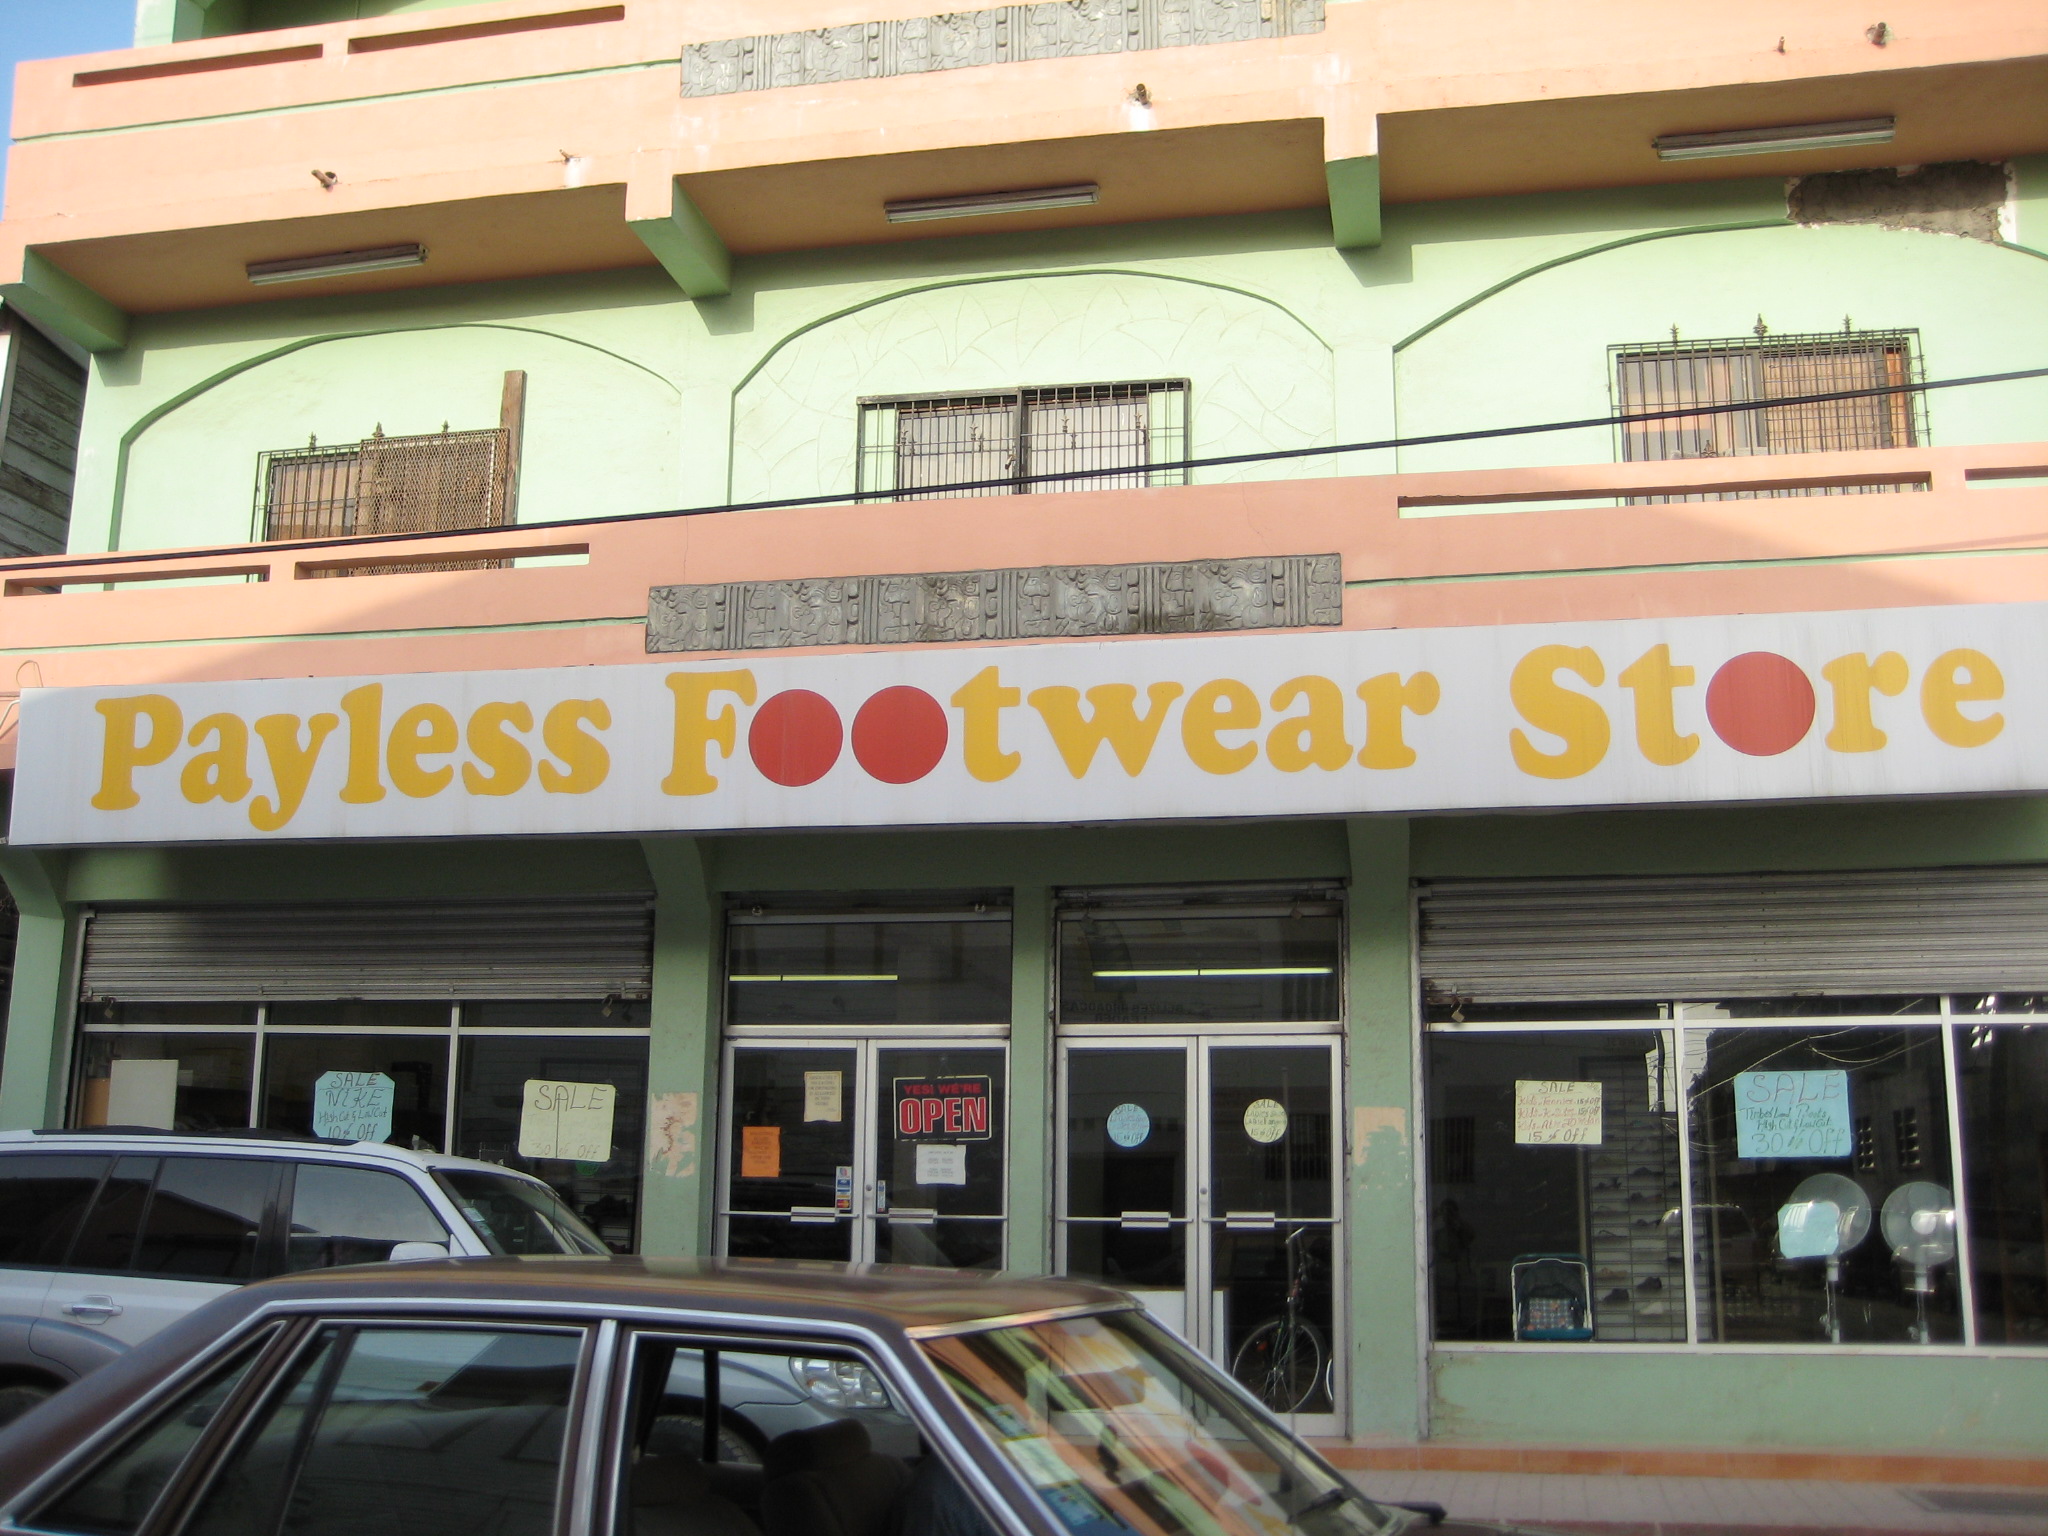 Payless | Drew Cogbill | Thesis Blog